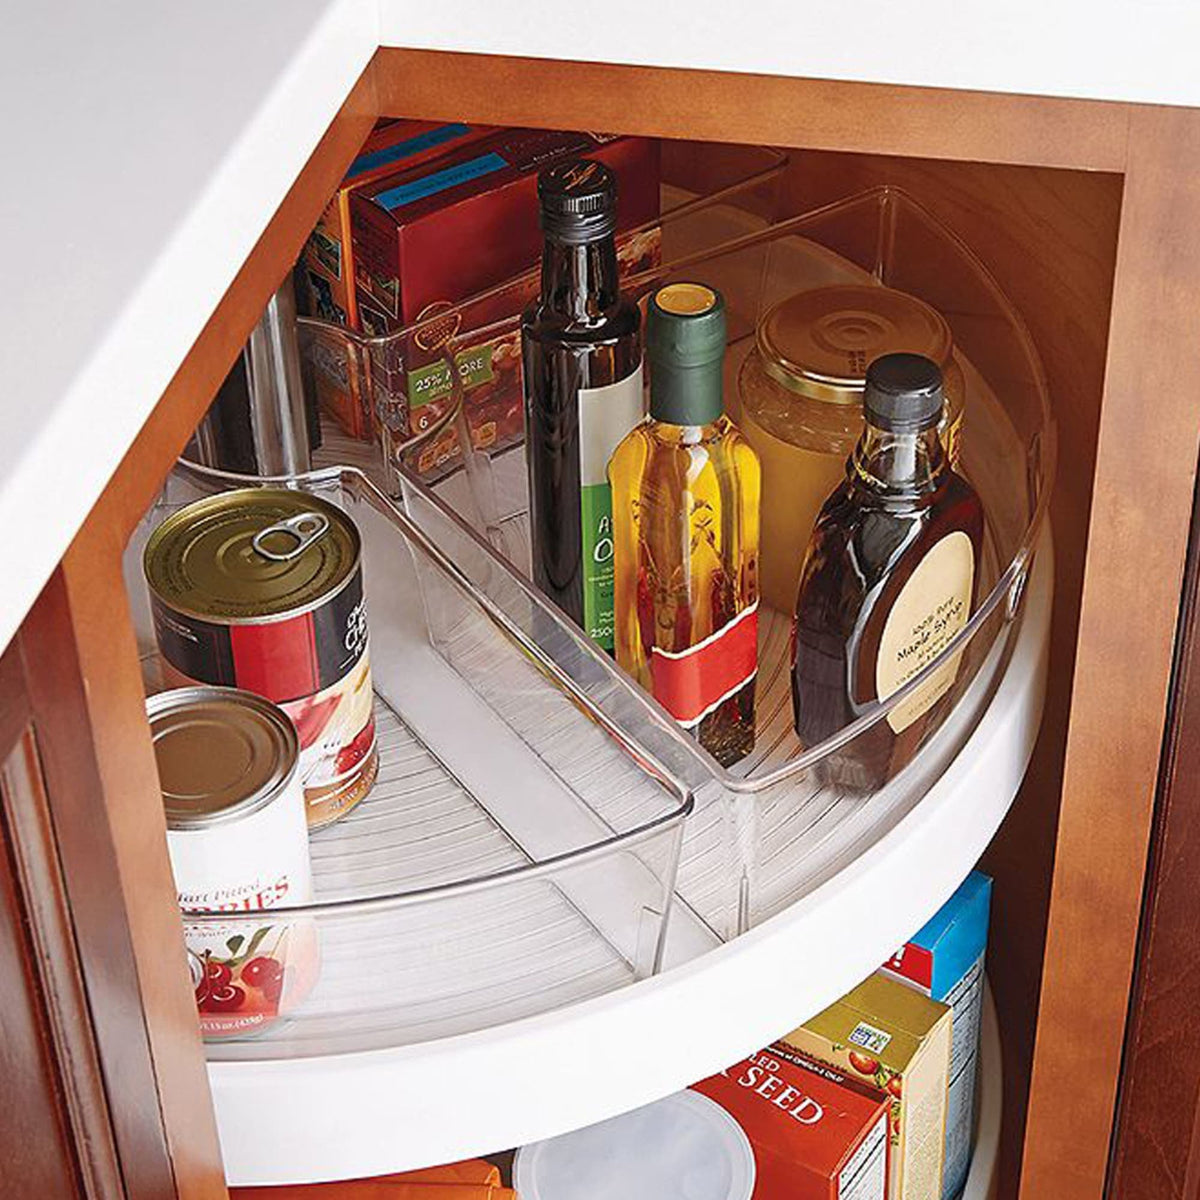 Heavy Duty Plastic Lazy Susan Storage Organizing Bin with Front Cut-Out  Handle, Clear, KITCHEN ORGANIZATION